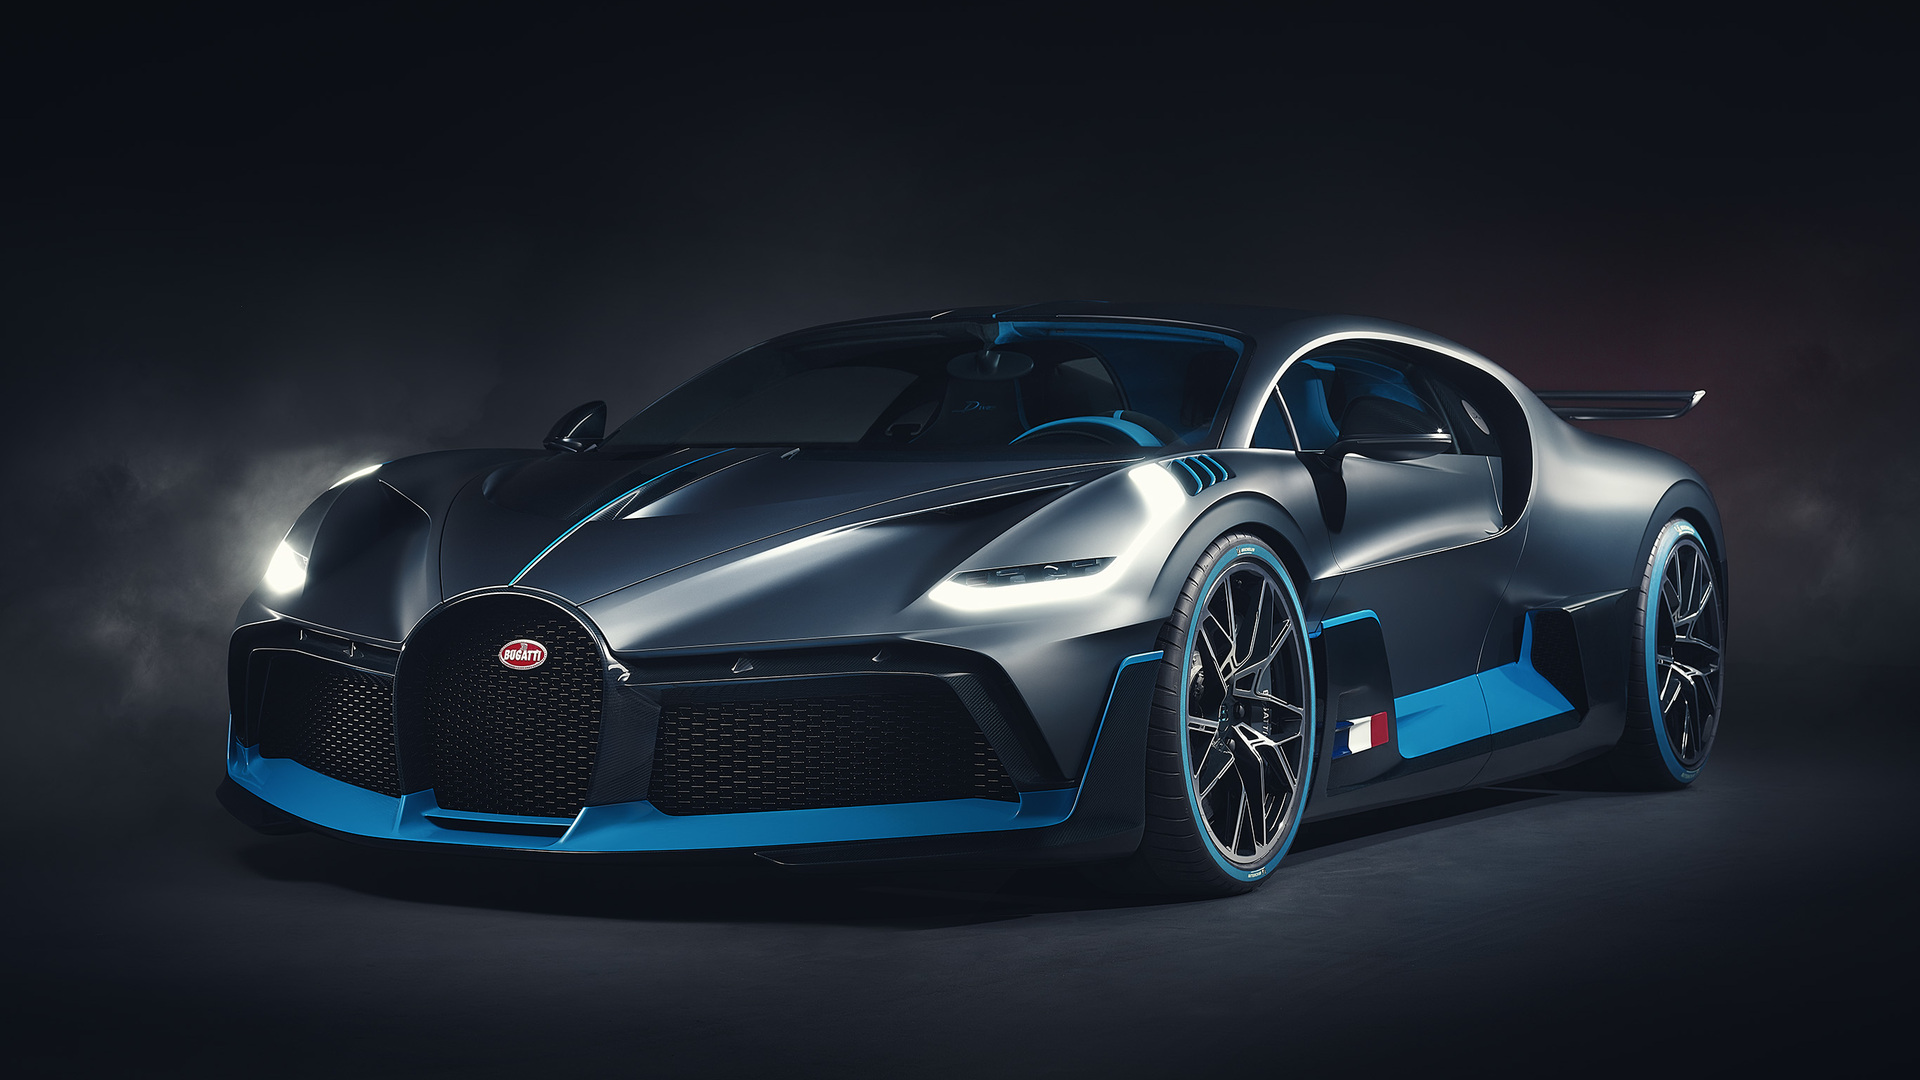 1920x1080 Bugatti Divo 2018 Photoshoot Laptop Full Hd 1080p Hd 4k Wallpapers Images Backgrounds Photos And Pictures